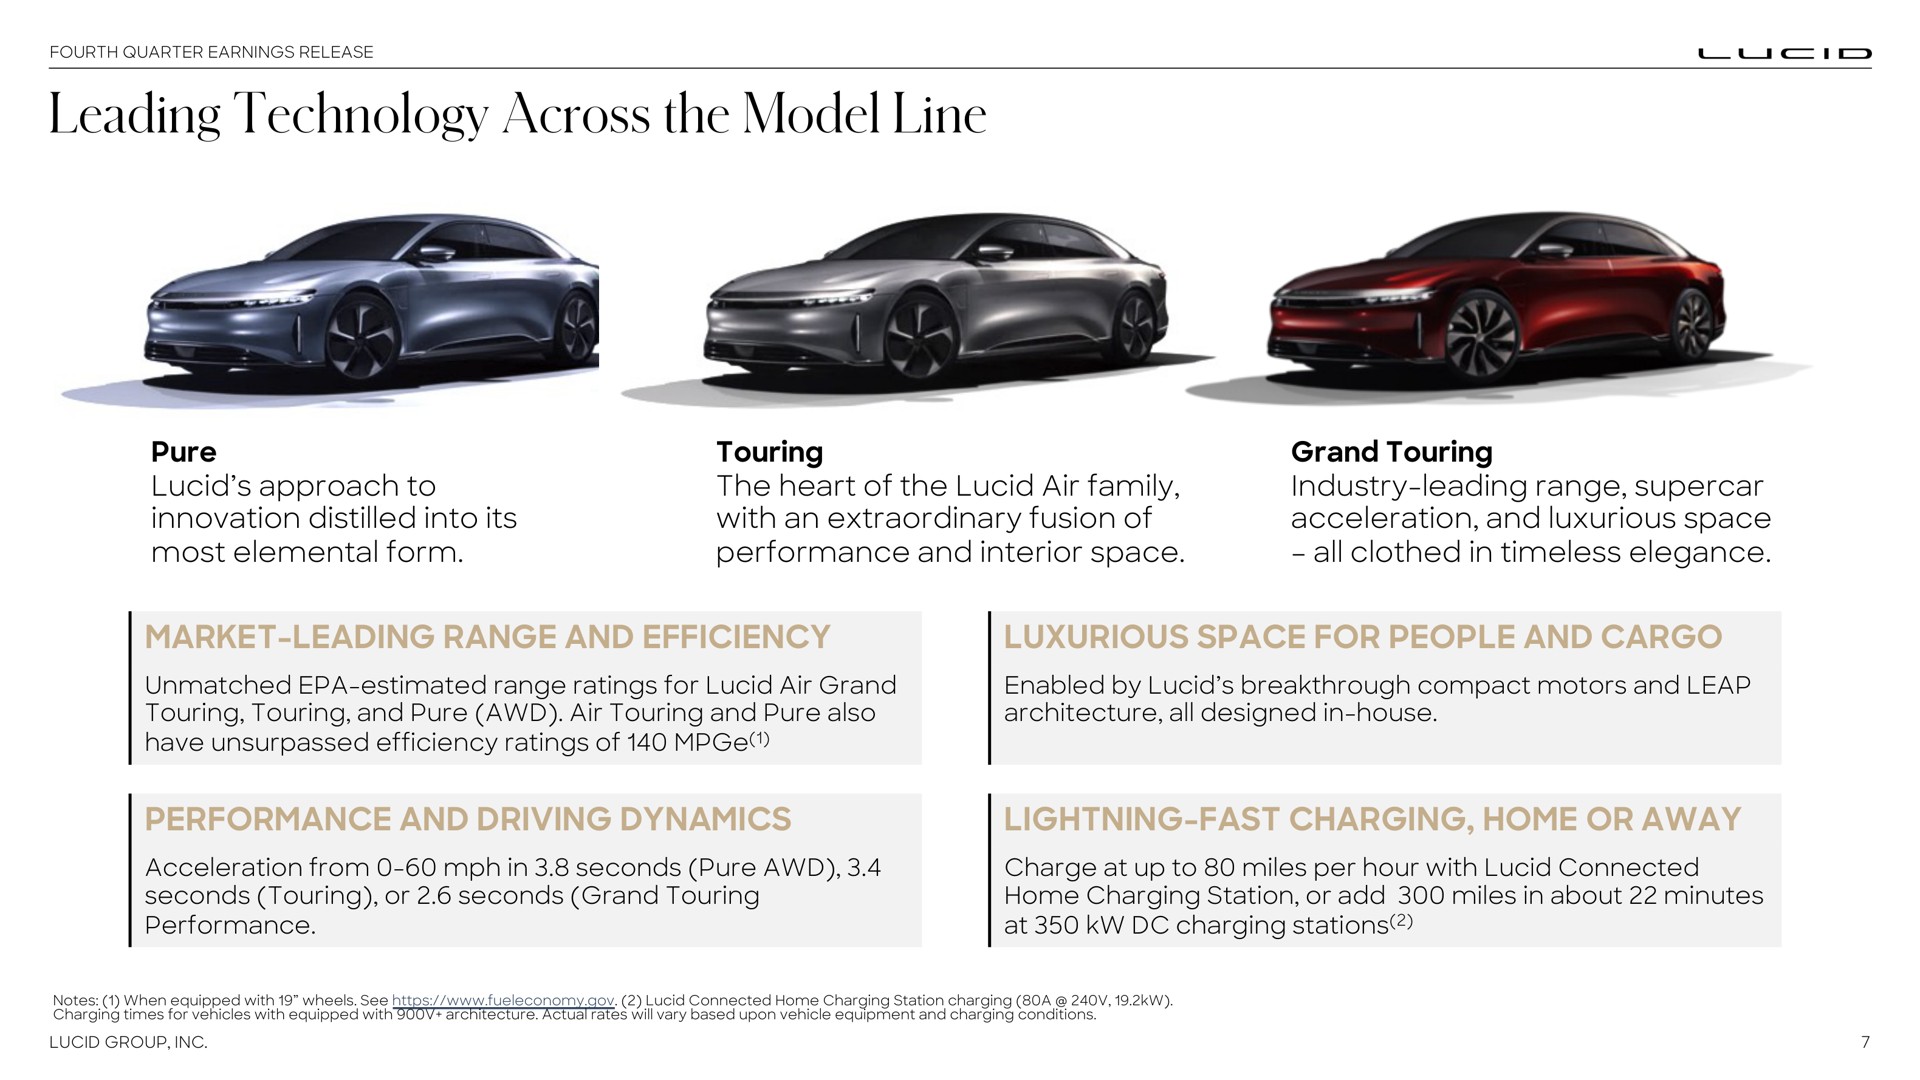 leading technology across the model line market leading range and efficiency luxurious space for people and cargo performance and driving dynamics lightning fast charging home or away | Lucid Motors